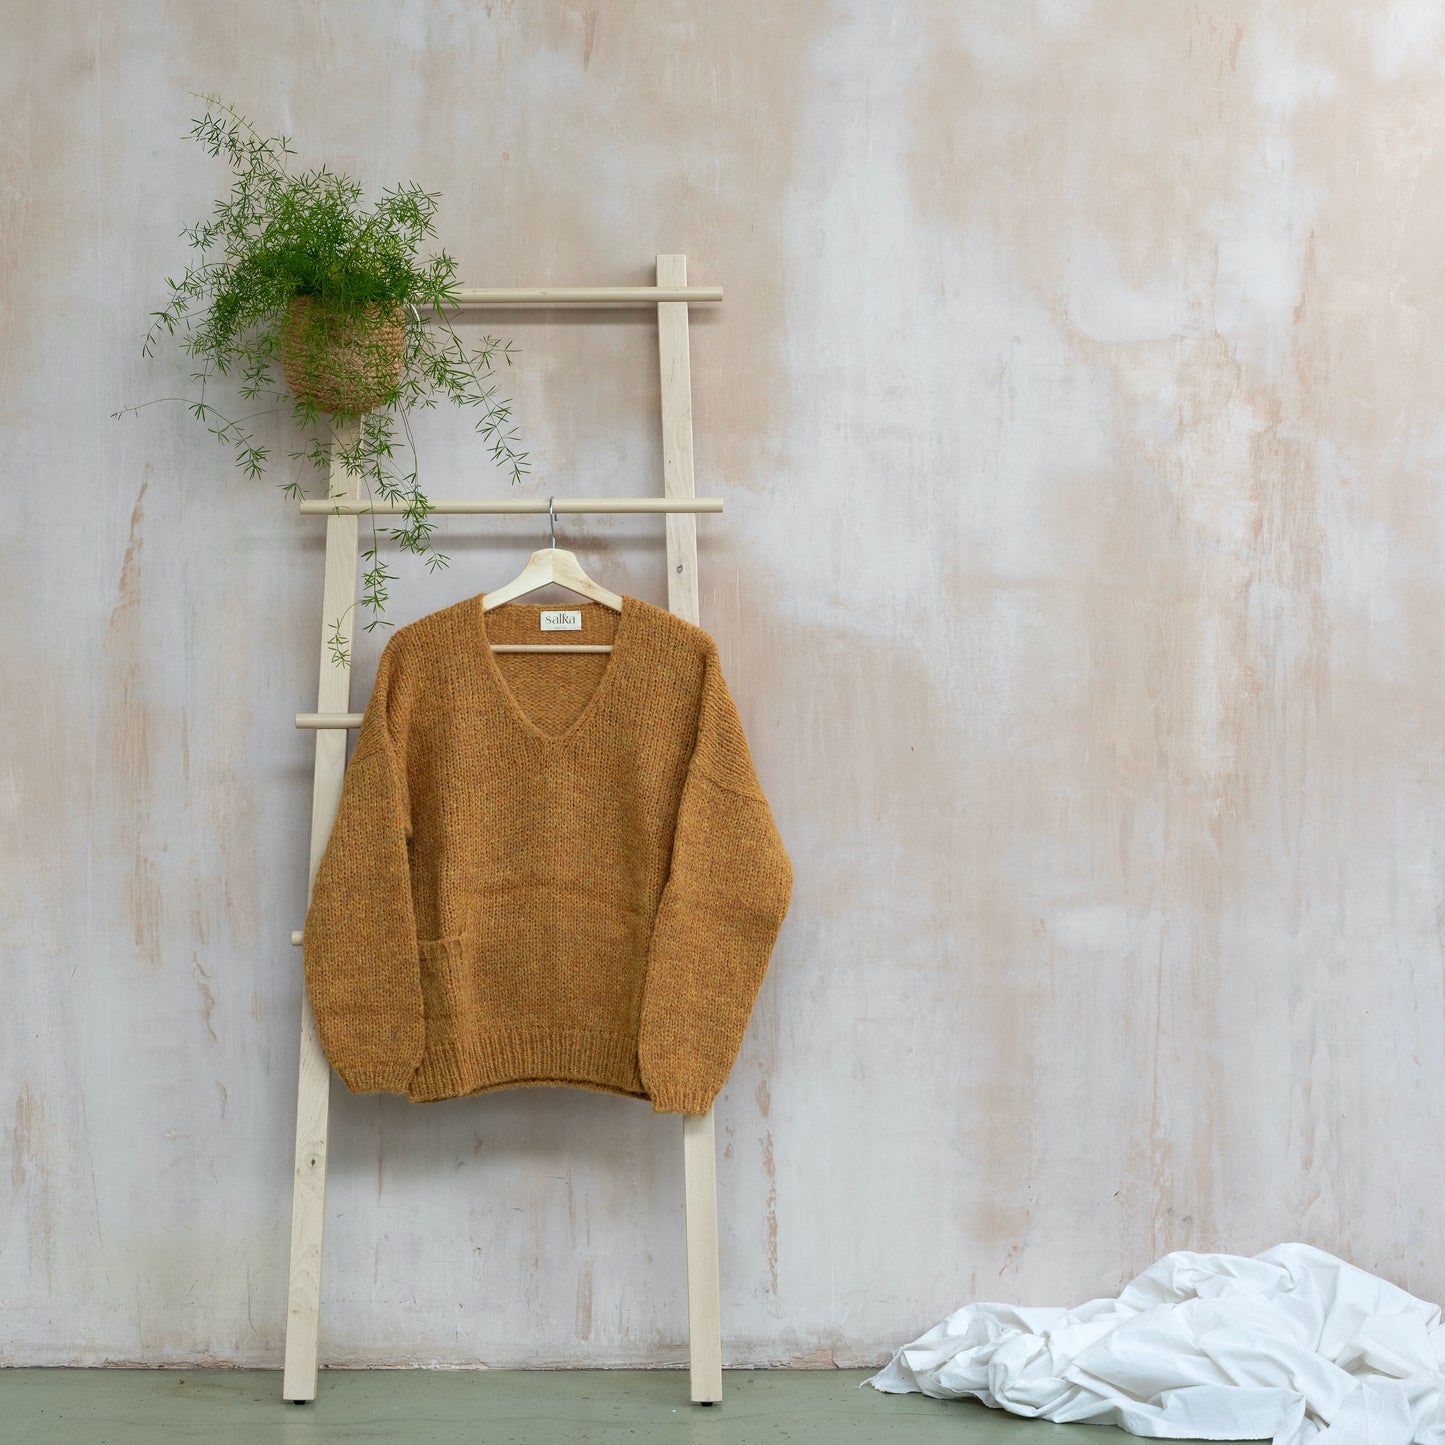 Warm v-neck alpaca sweater, yellow colour, long sleeve, displayed on a ladder